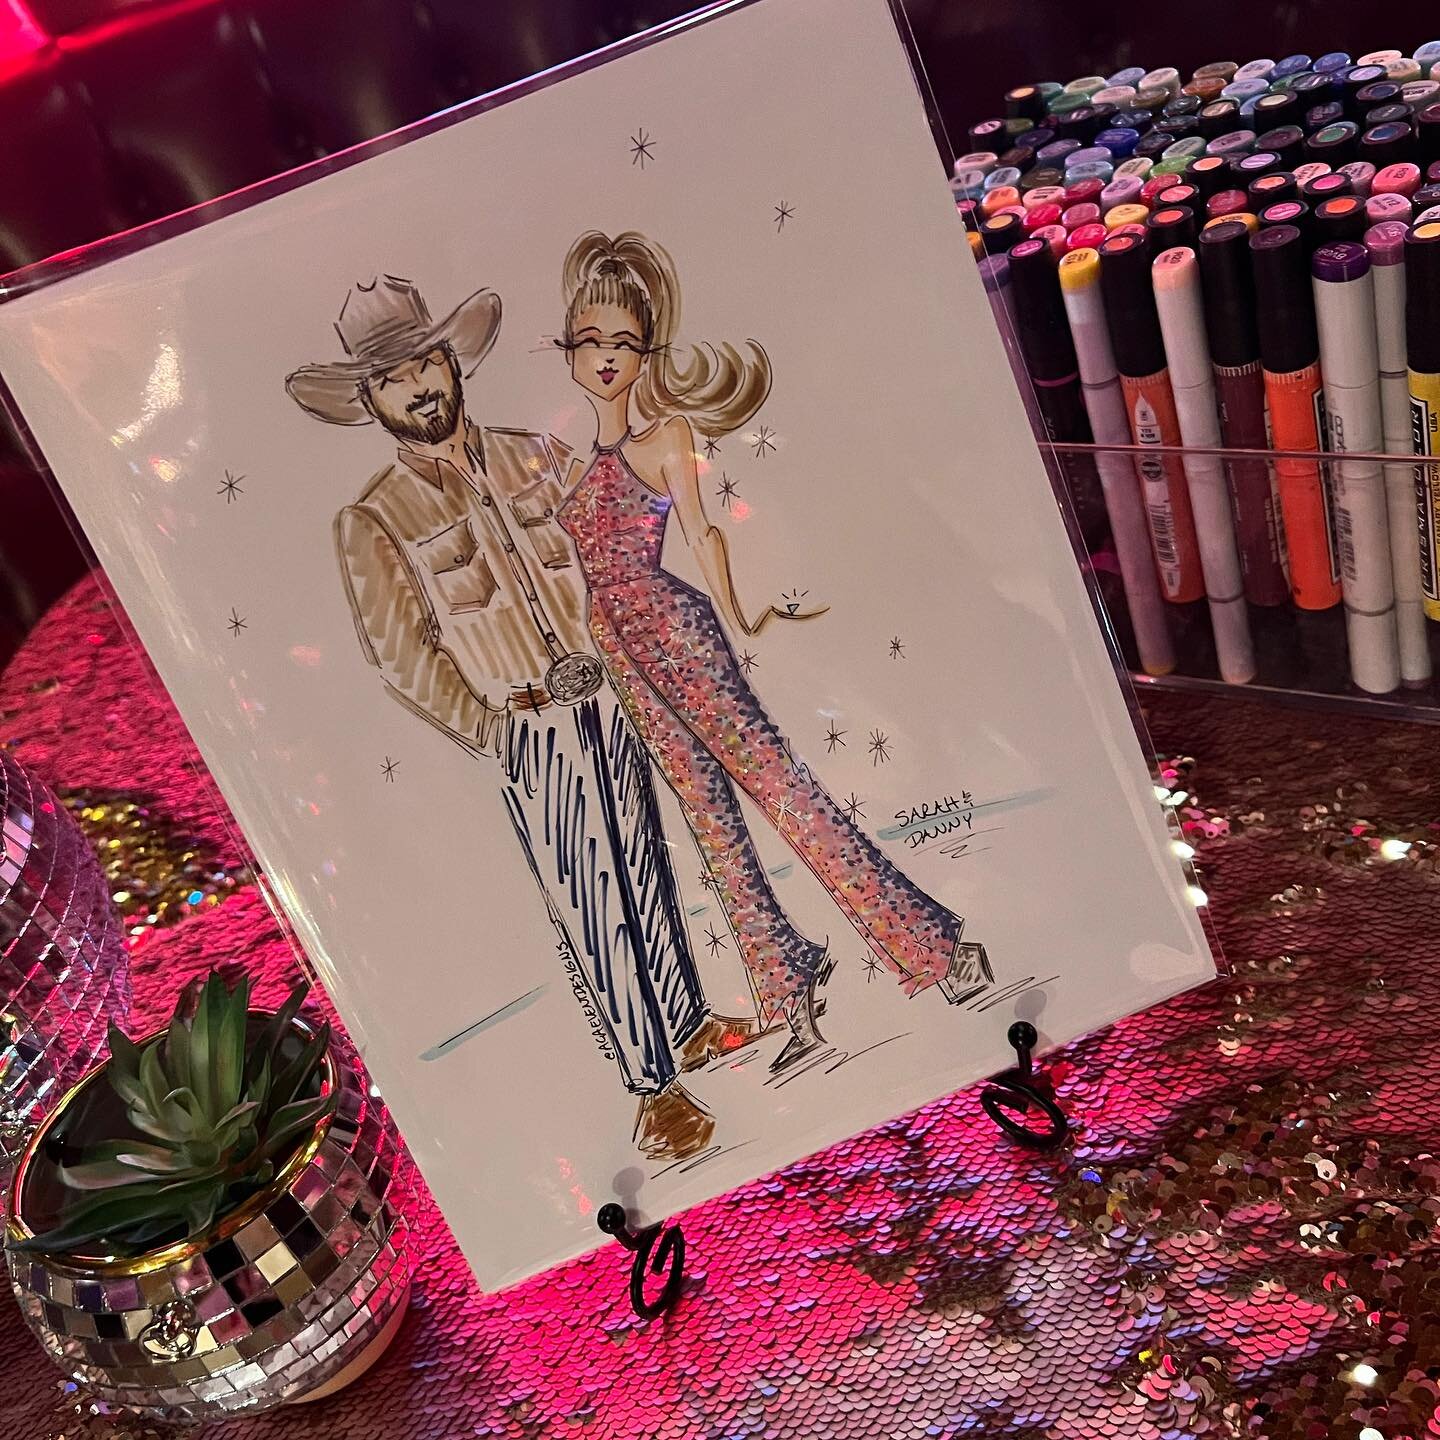 Live sketch event for Chanel at Saks Fifth Avenue opening in Houston  Galleria — Fashion and Beauty Illustrator Rongrong DeVoe